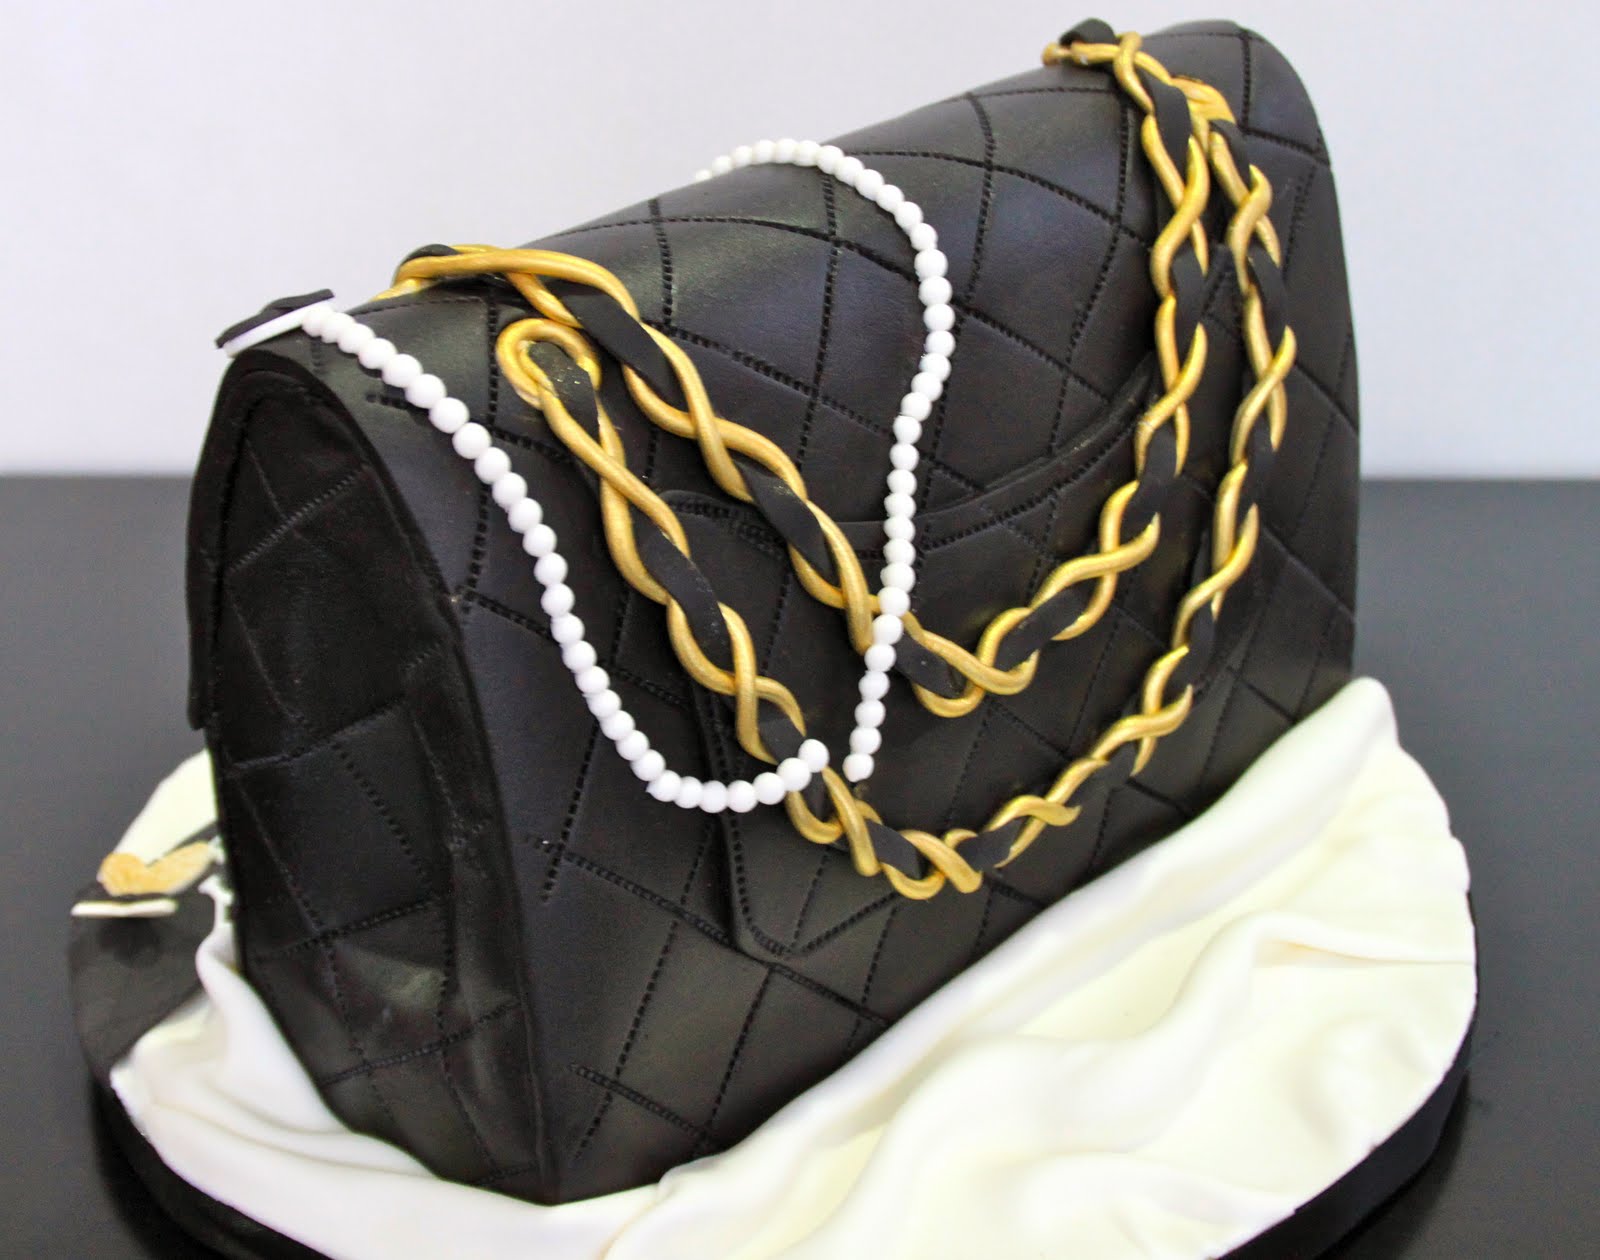 Celebrate with Cake!: Chanel Bag Cake with Pearls